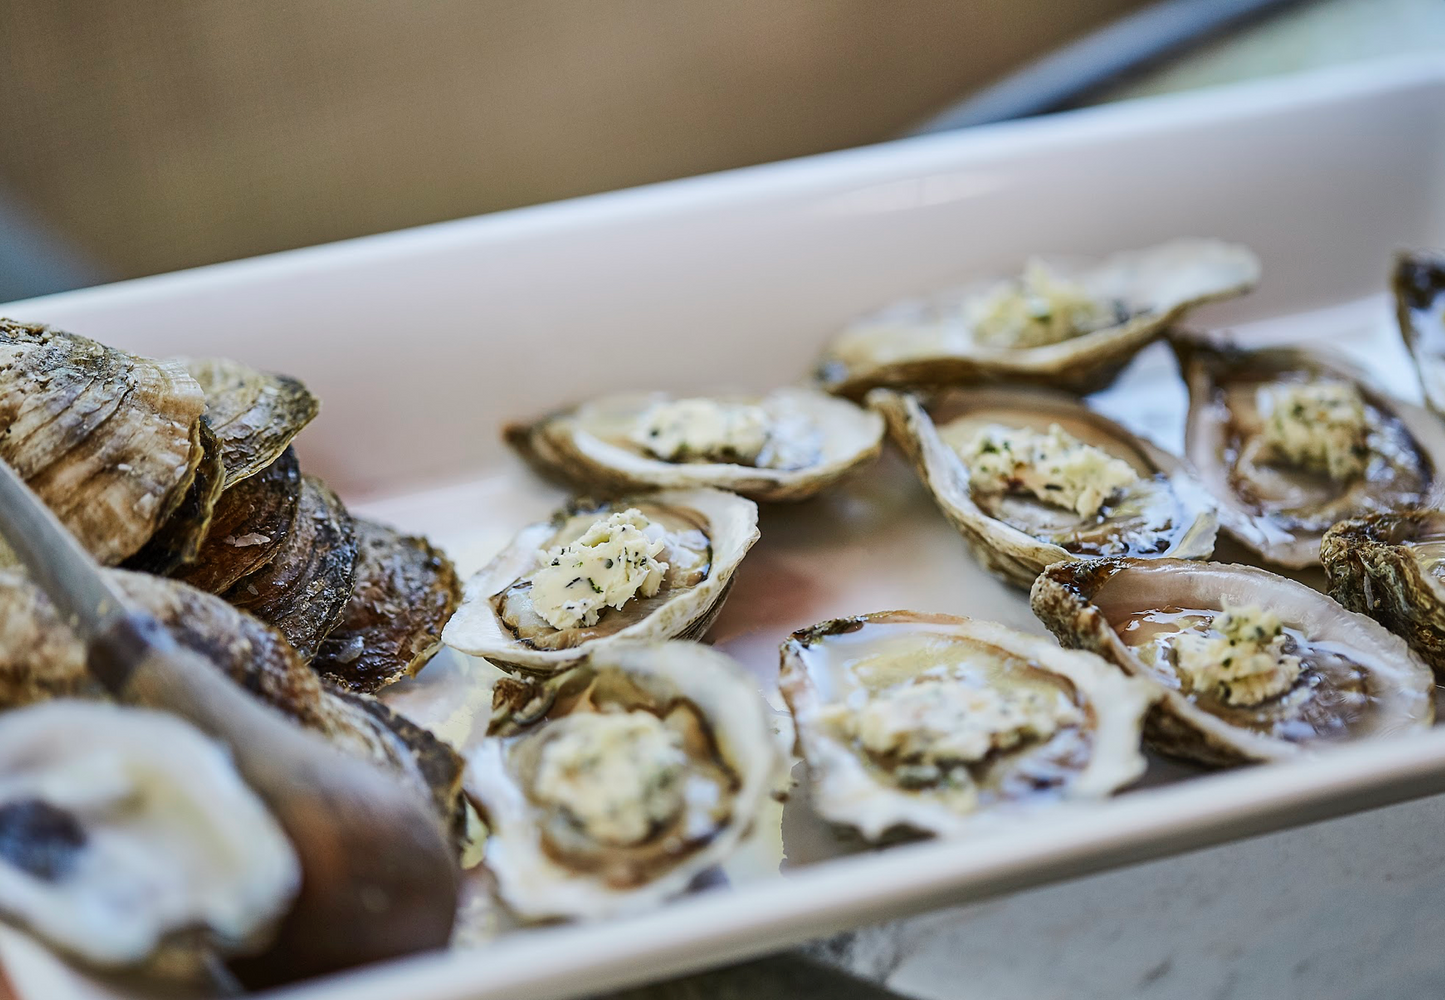 No Shucking Required - The Easy Way to Enjoy Oysters at Home!